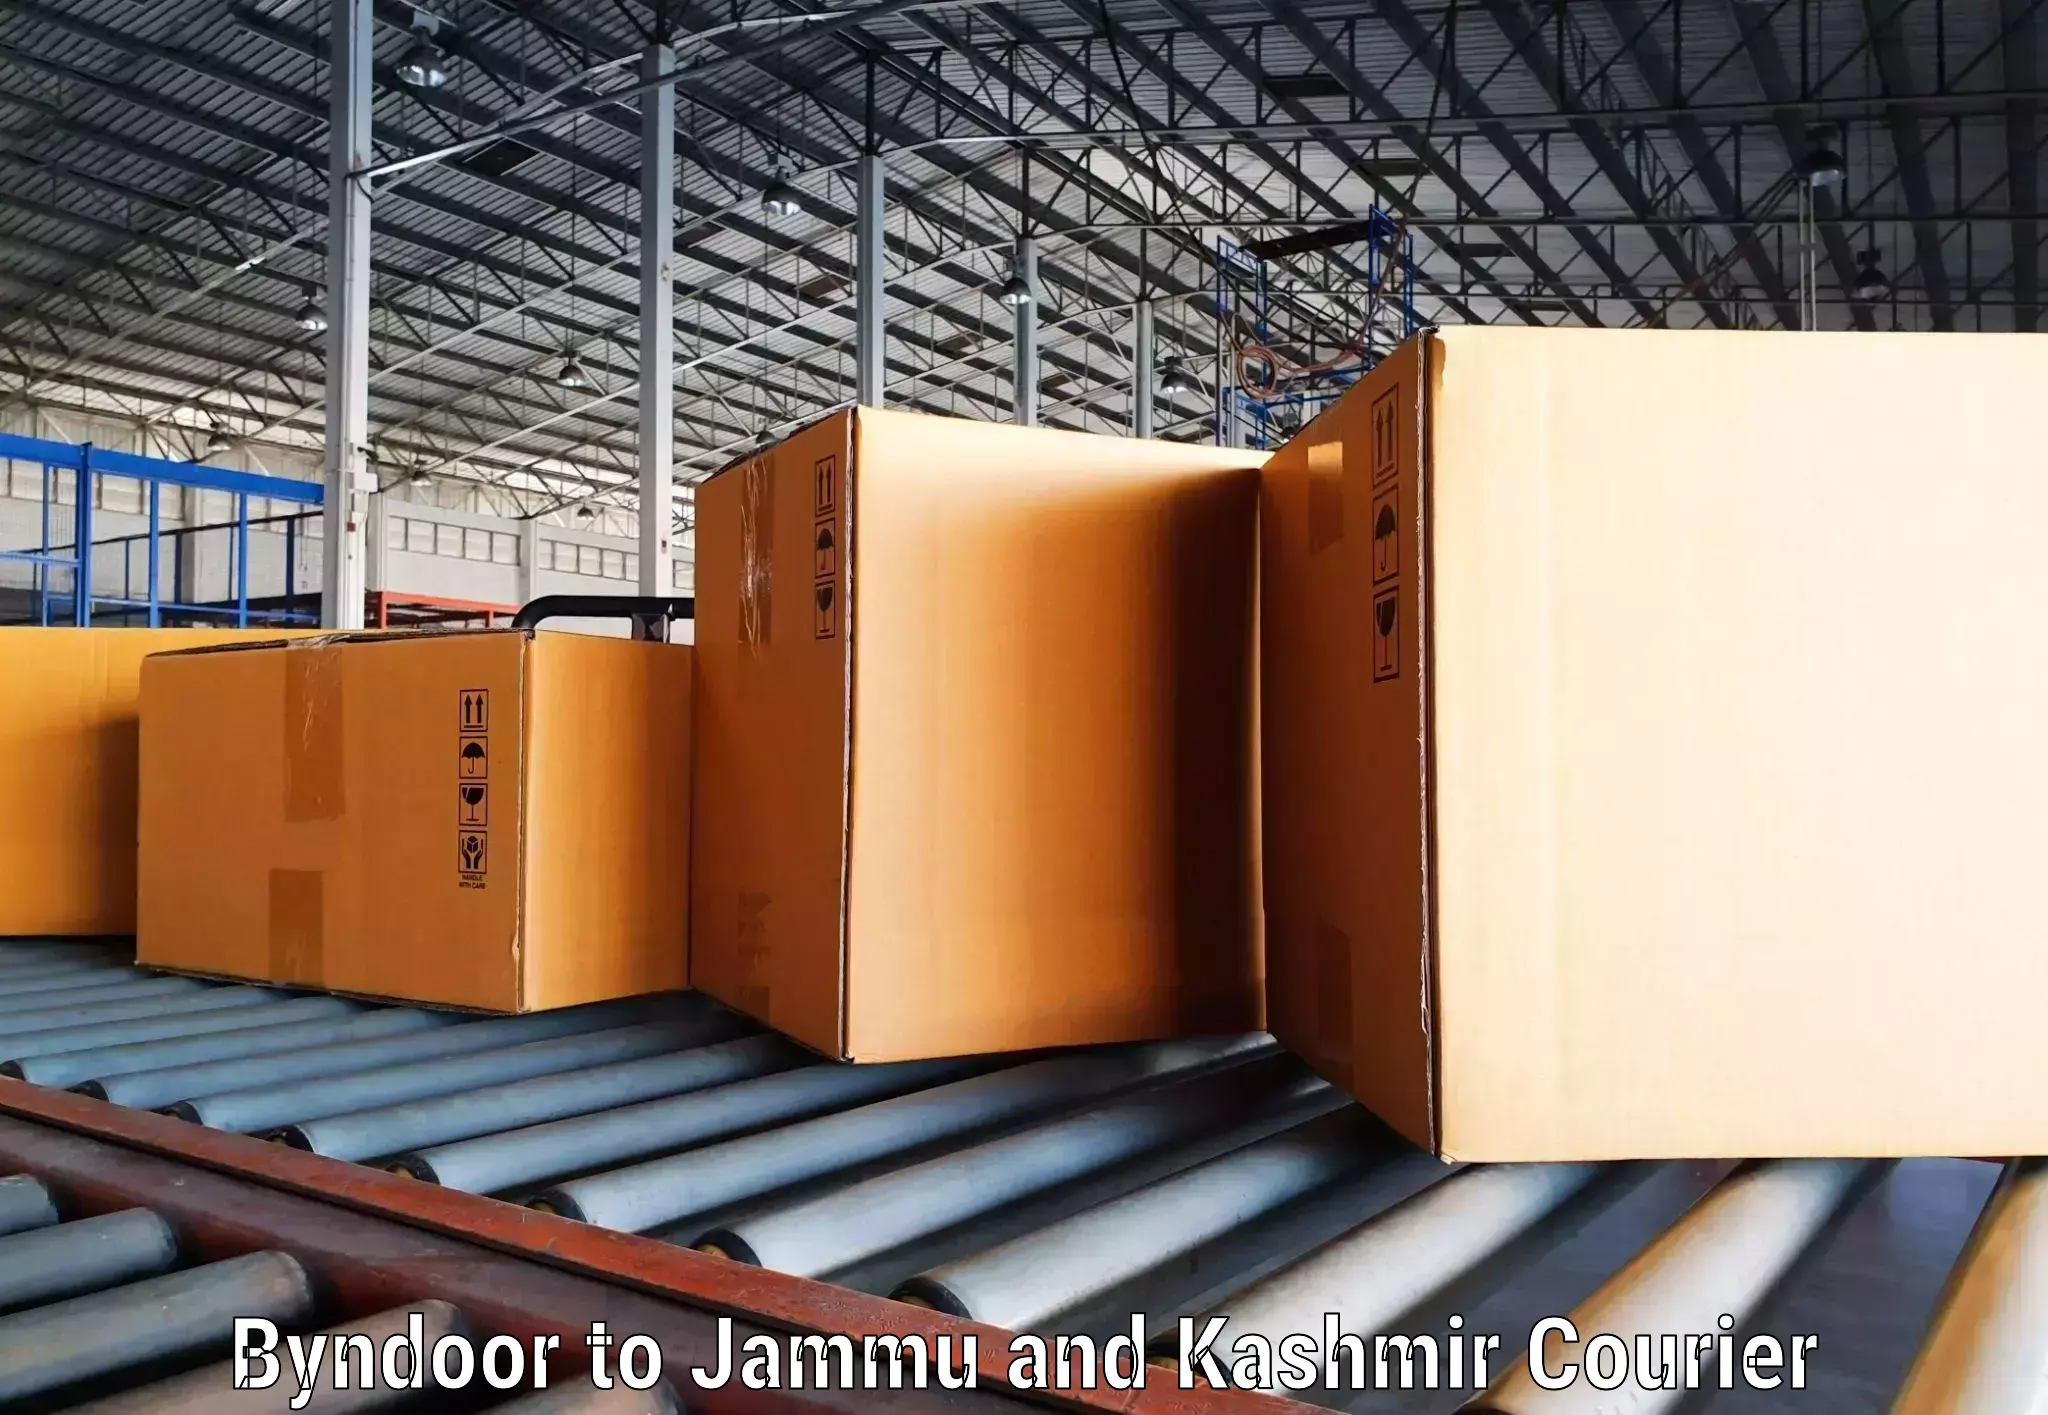 Express delivery capabilities Byndoor to University of Jammu